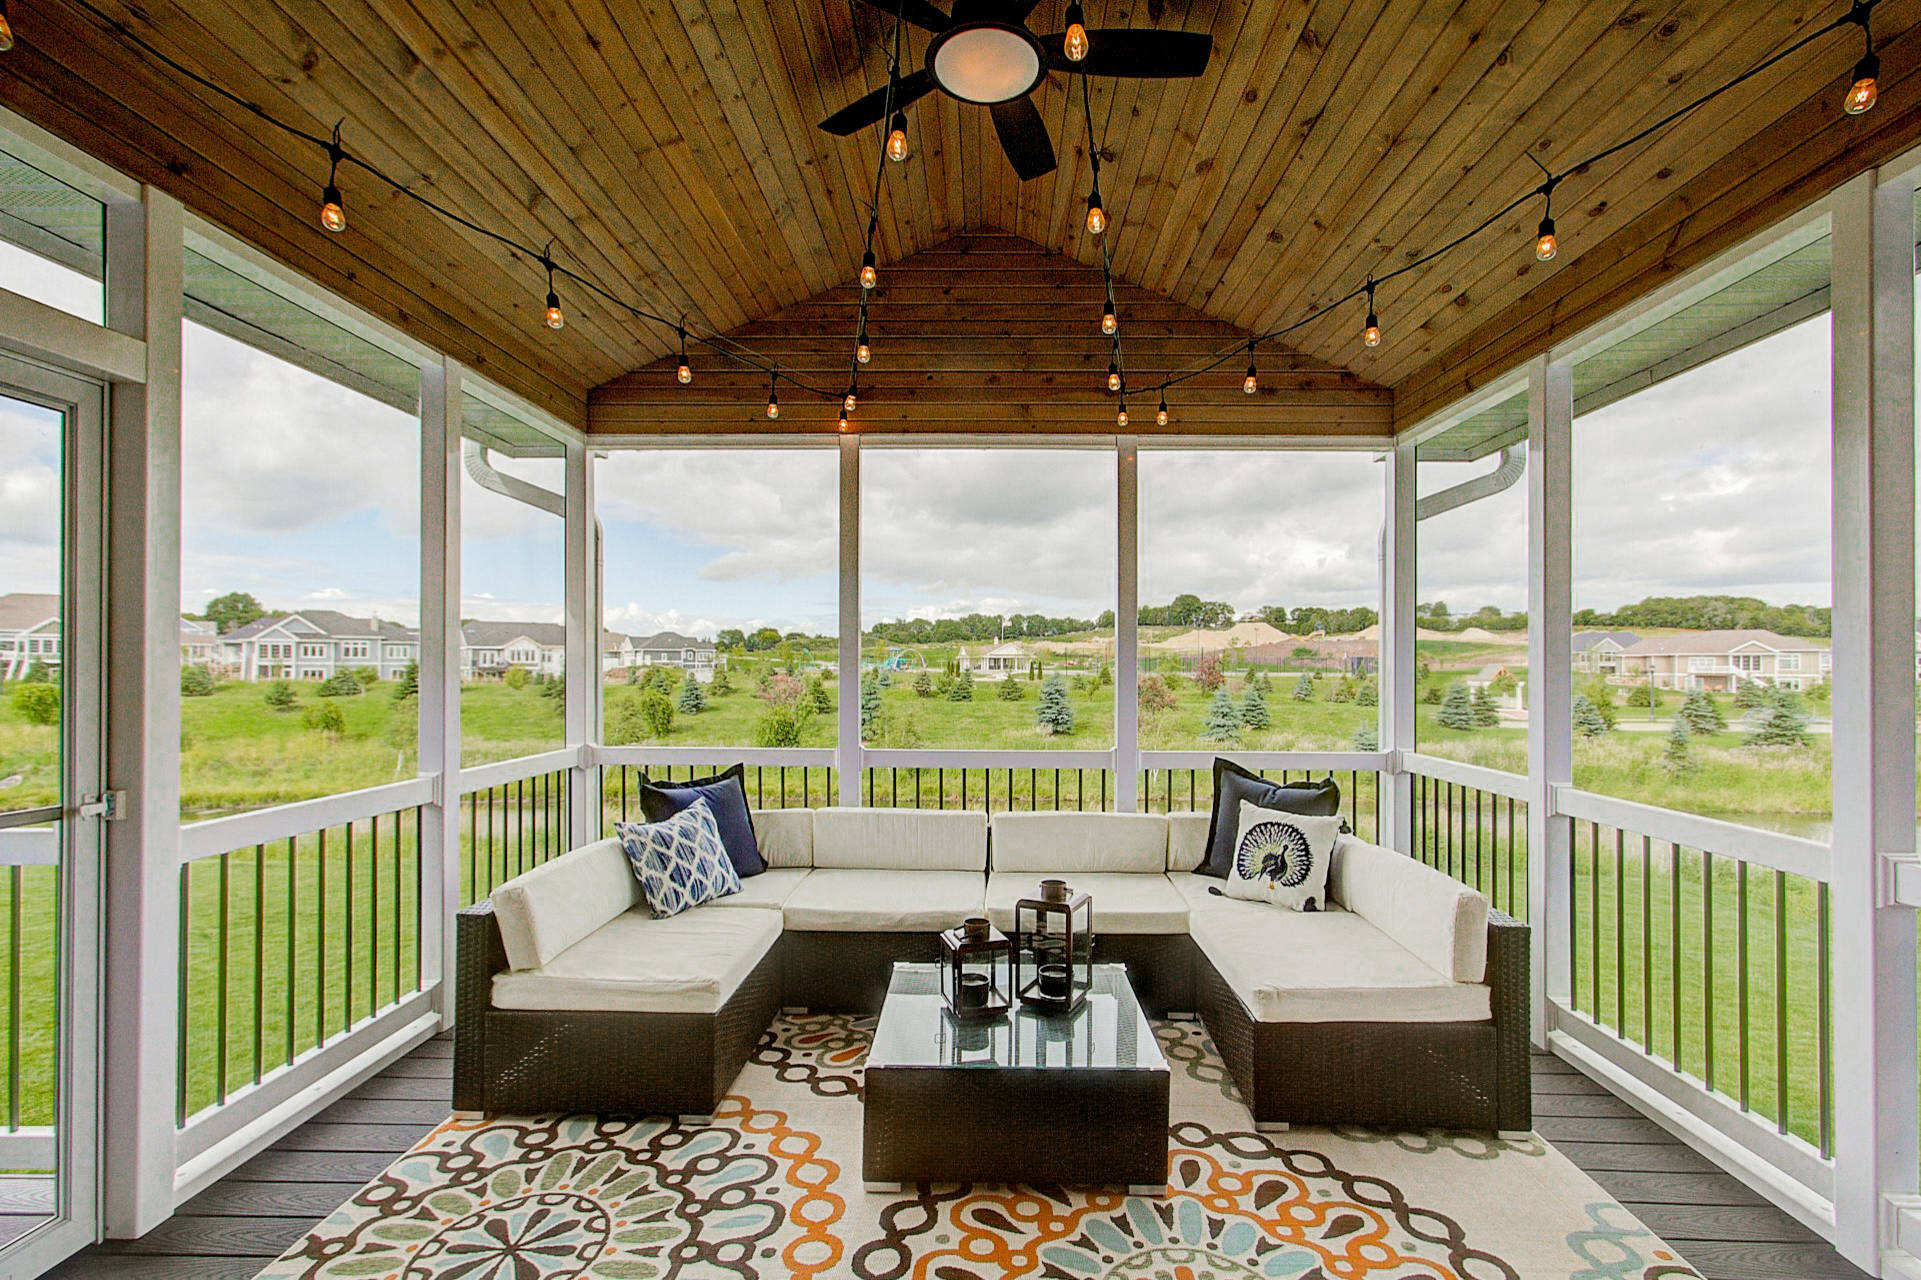 75 Screened-In Porch Ideas You'll Love - February, 2023 | Houzz